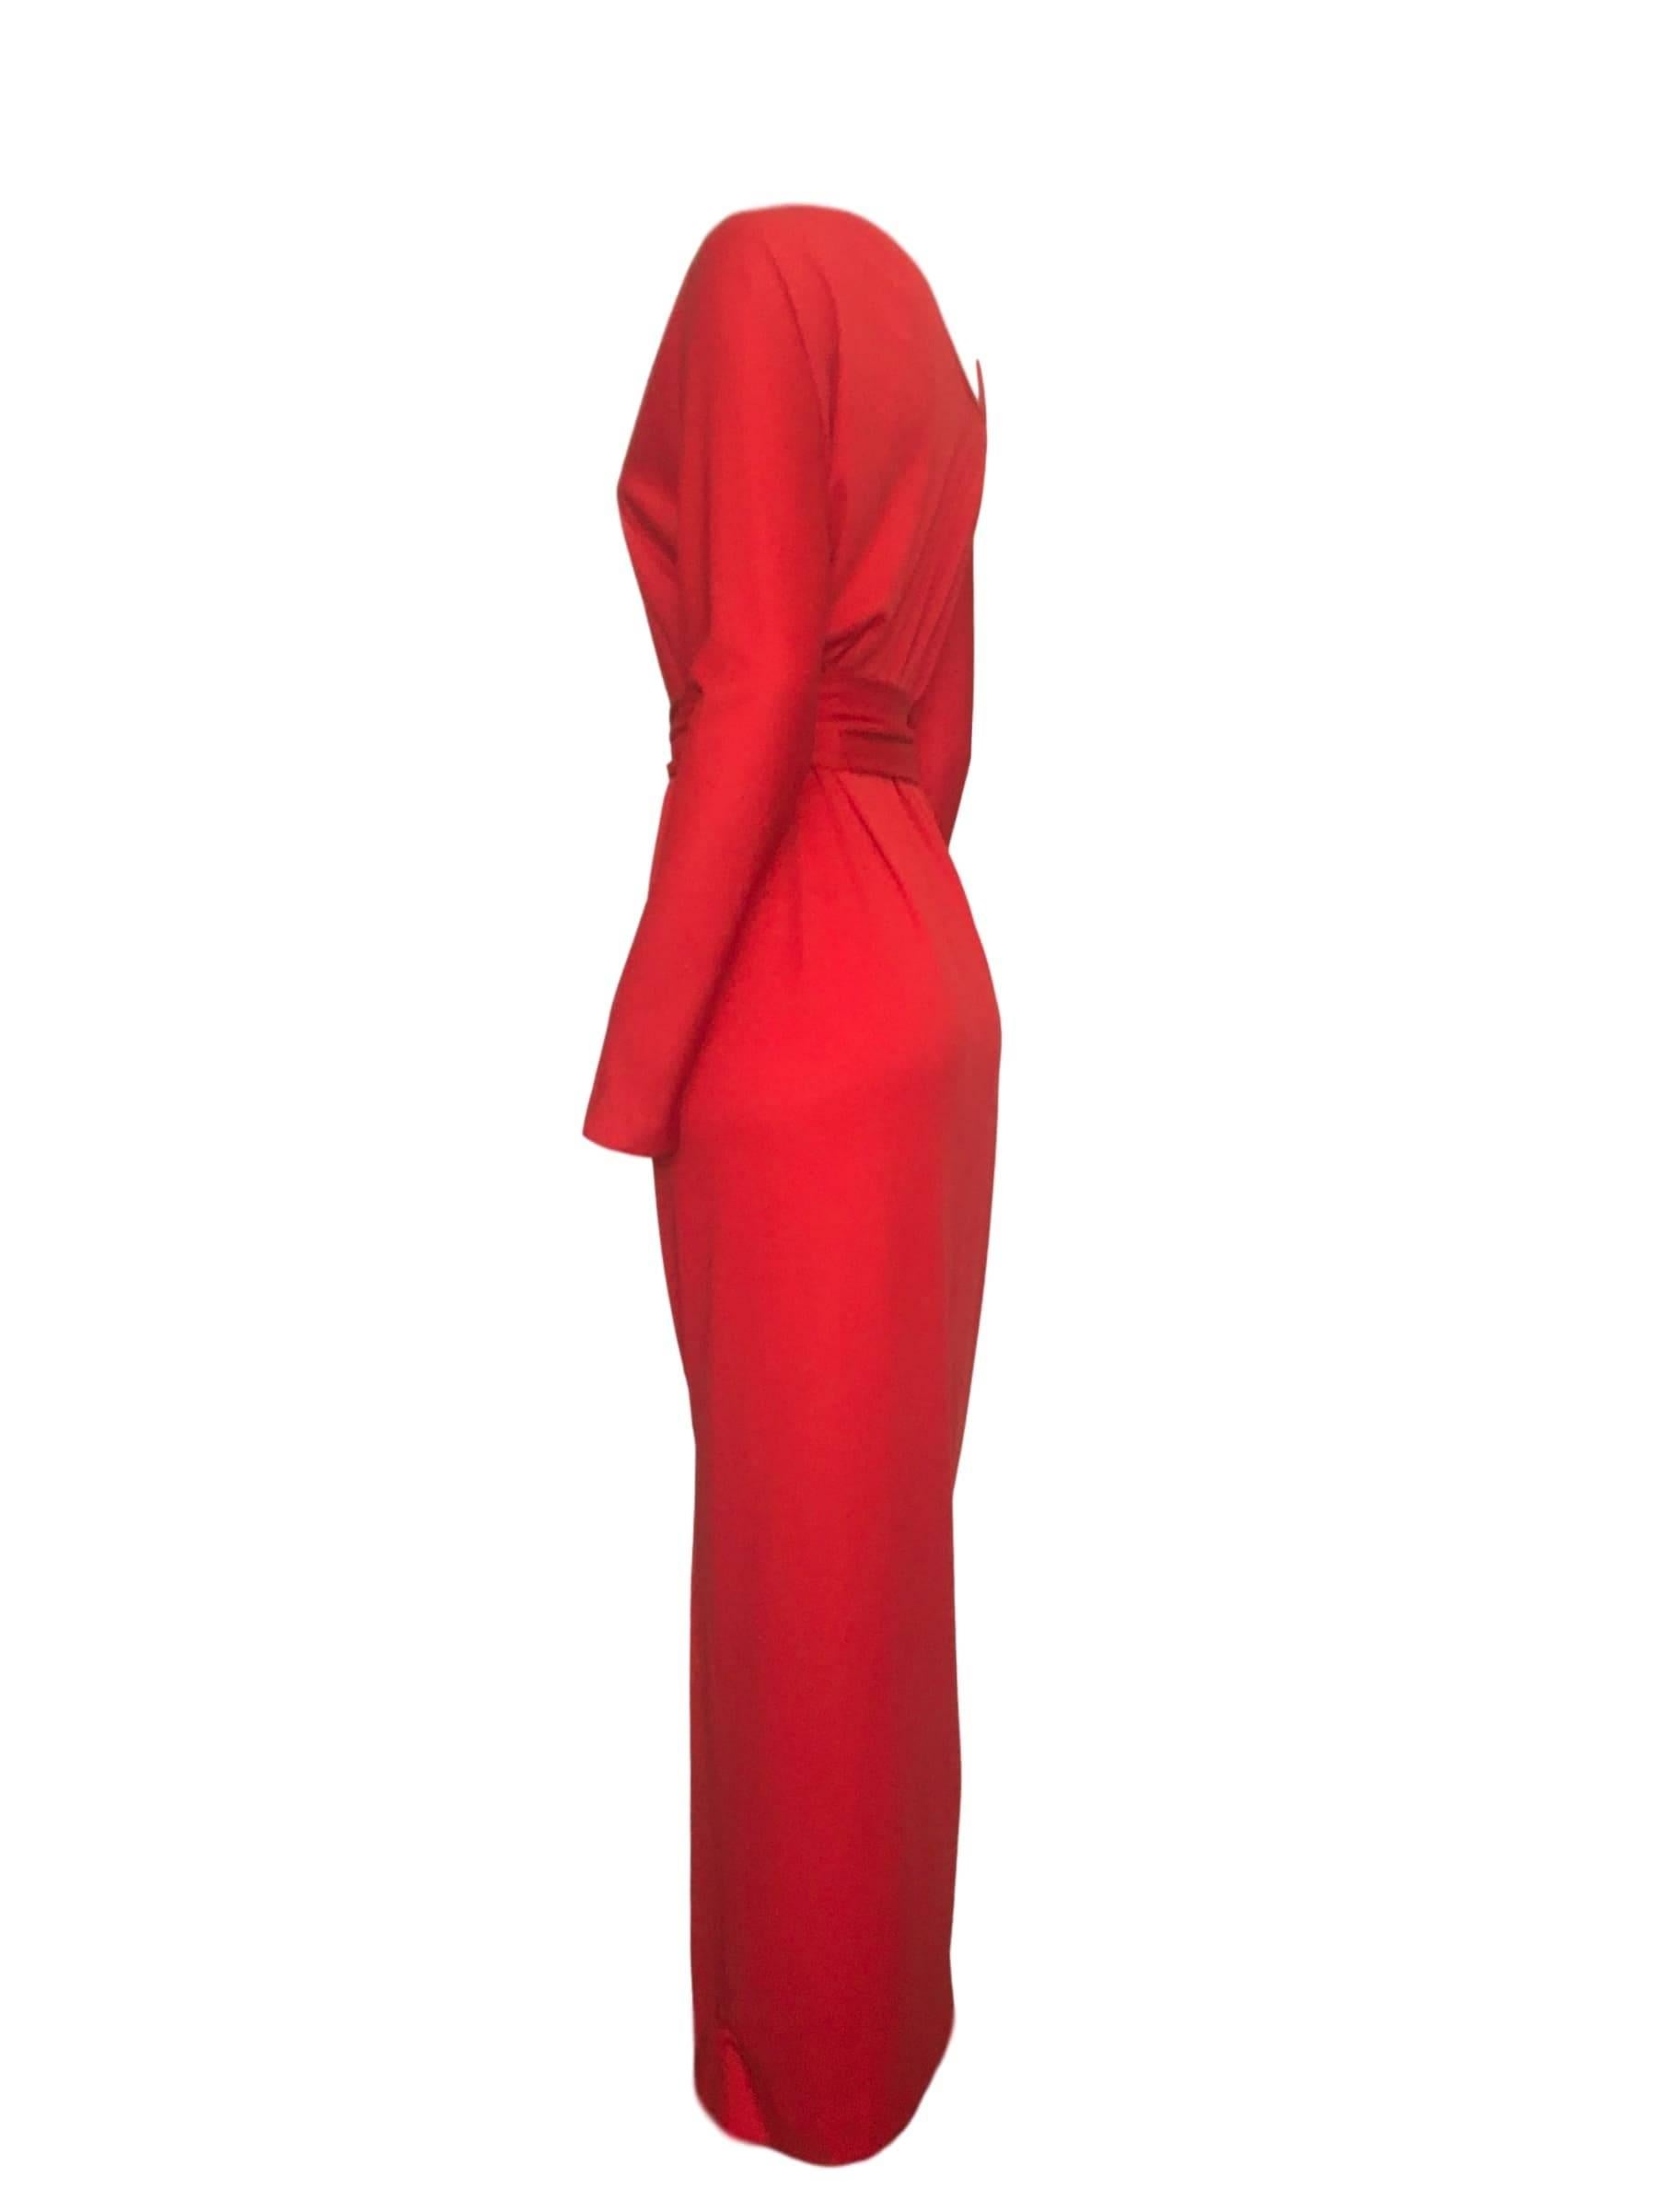 Victor Costa for Lord & Taylor rayon red jersey Hollywood maxi dress, with asymmetric neck line. Long waist belt with tassel trim. 

Size UK 10/12 measures 19 inches across chest 15 inches across waist and 55 inches length.

In excellent condition.